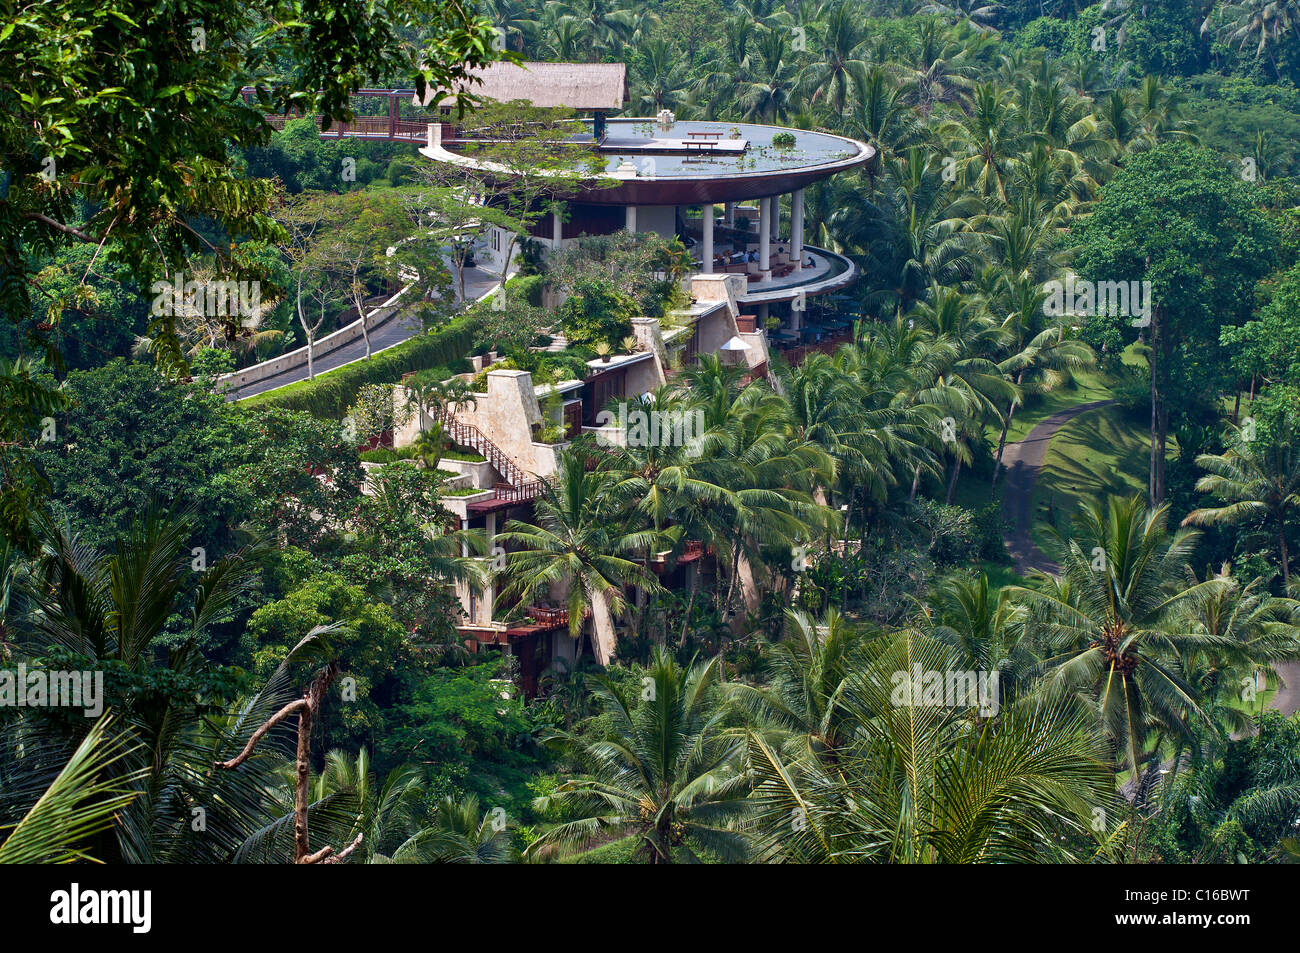 The Four Seasons Hotel set amongst the rice paddies at Sayan in Bali Stock Photo